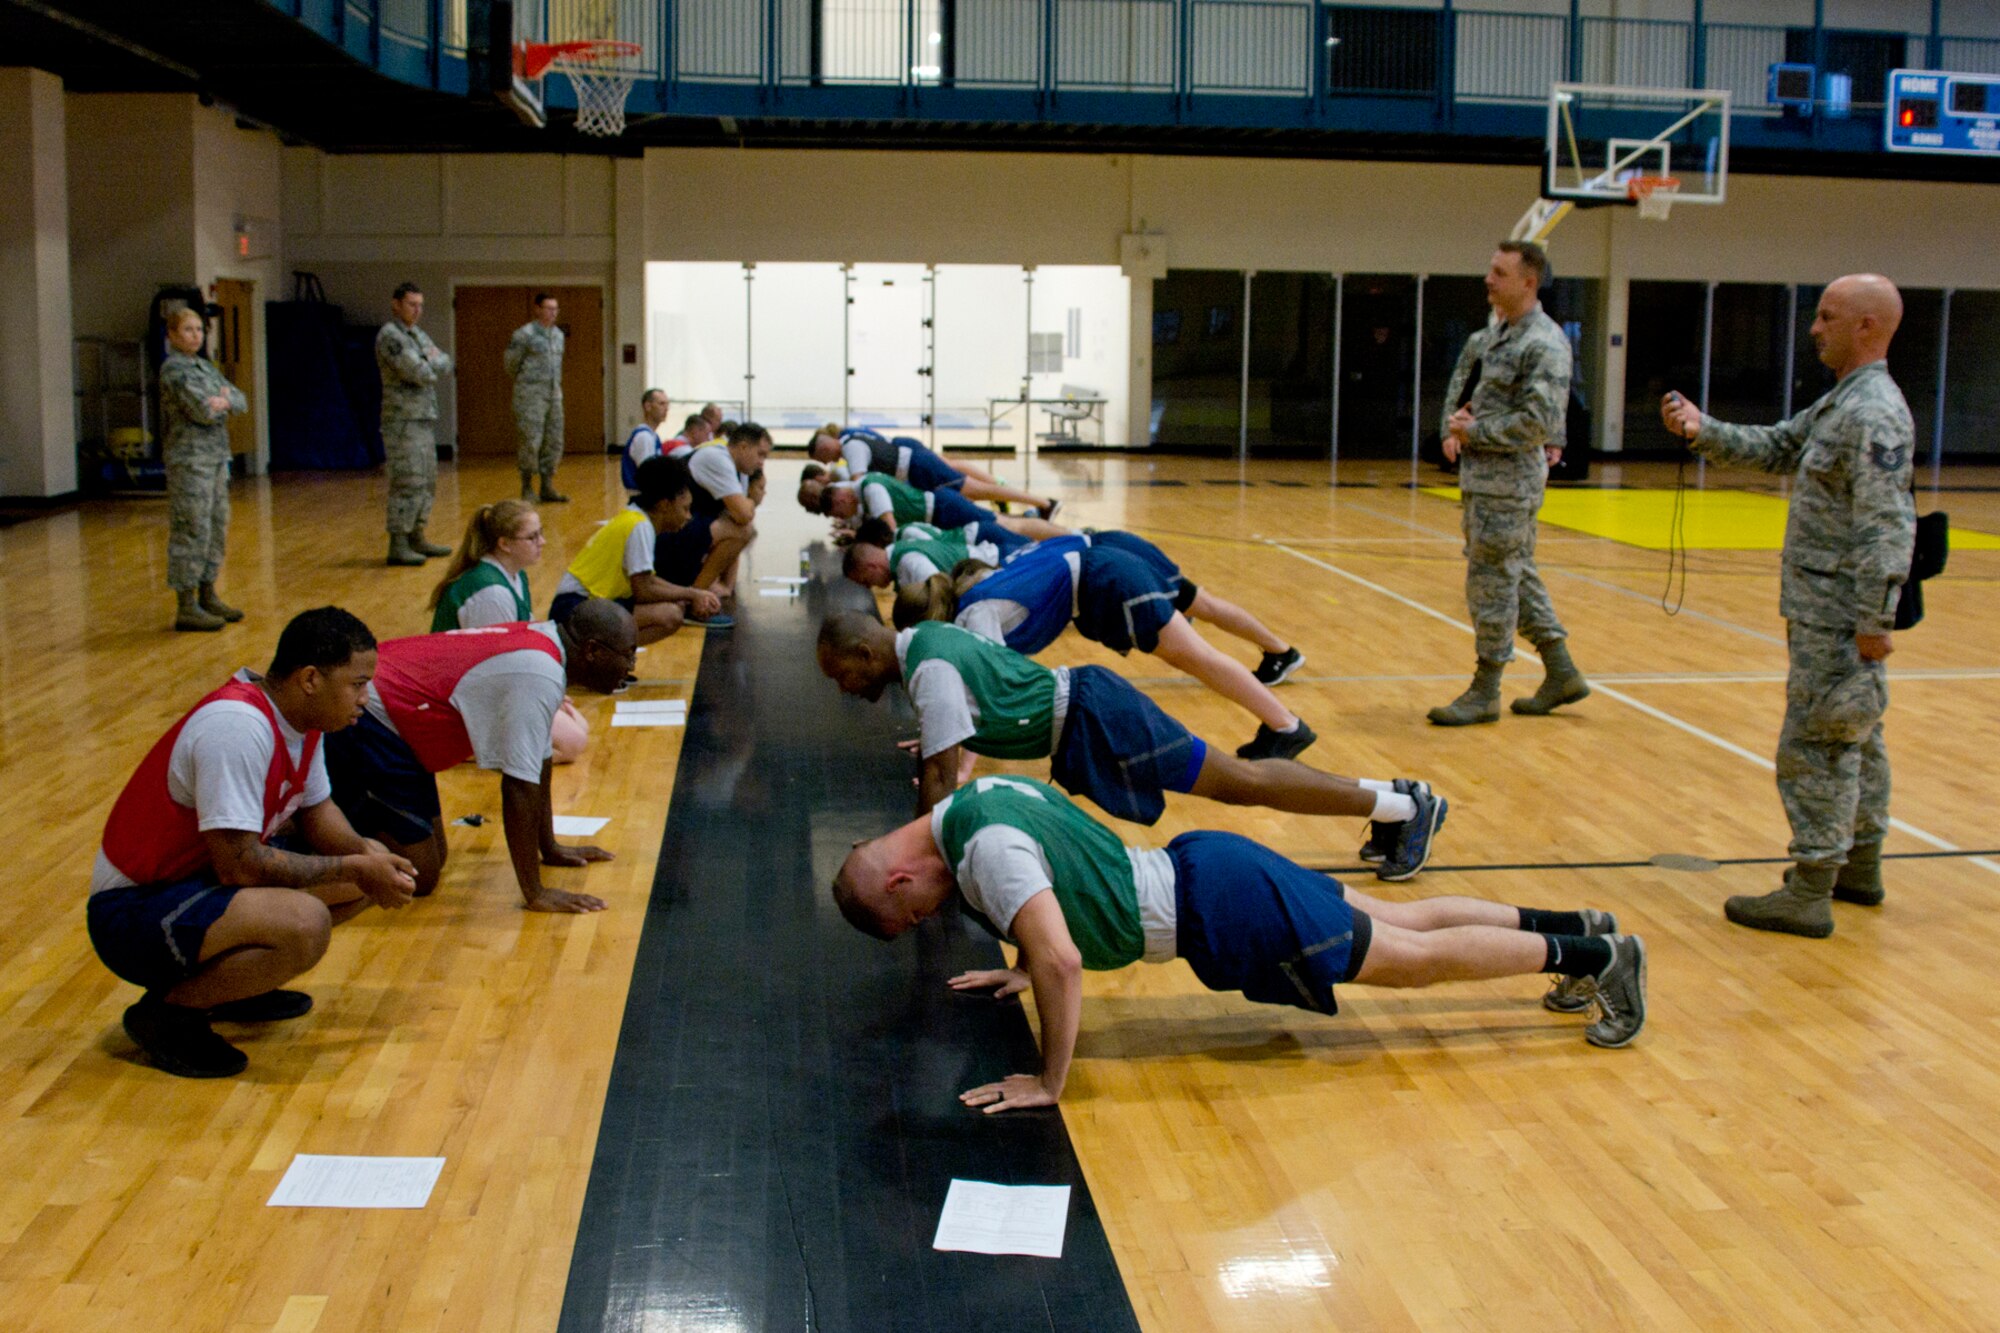 U.S. Air Force Reserve Airmen assigned to the 913th Airlift Group, perform push-ups during their physical fitness assessment test at Little Rock Air Force Base, Ark., Aug. 5, 2017. The Air Force uses overall composite fitness score and minimum scores per component based on aerobic fitness (1.5-mile timed run), body composition (abdominal circumference measurements) and muscular fitness components (push-ups and sit-ups) to determine overall fitness. (U.S. Air Force photo by Master Sgt. Jeff Walston/Released)